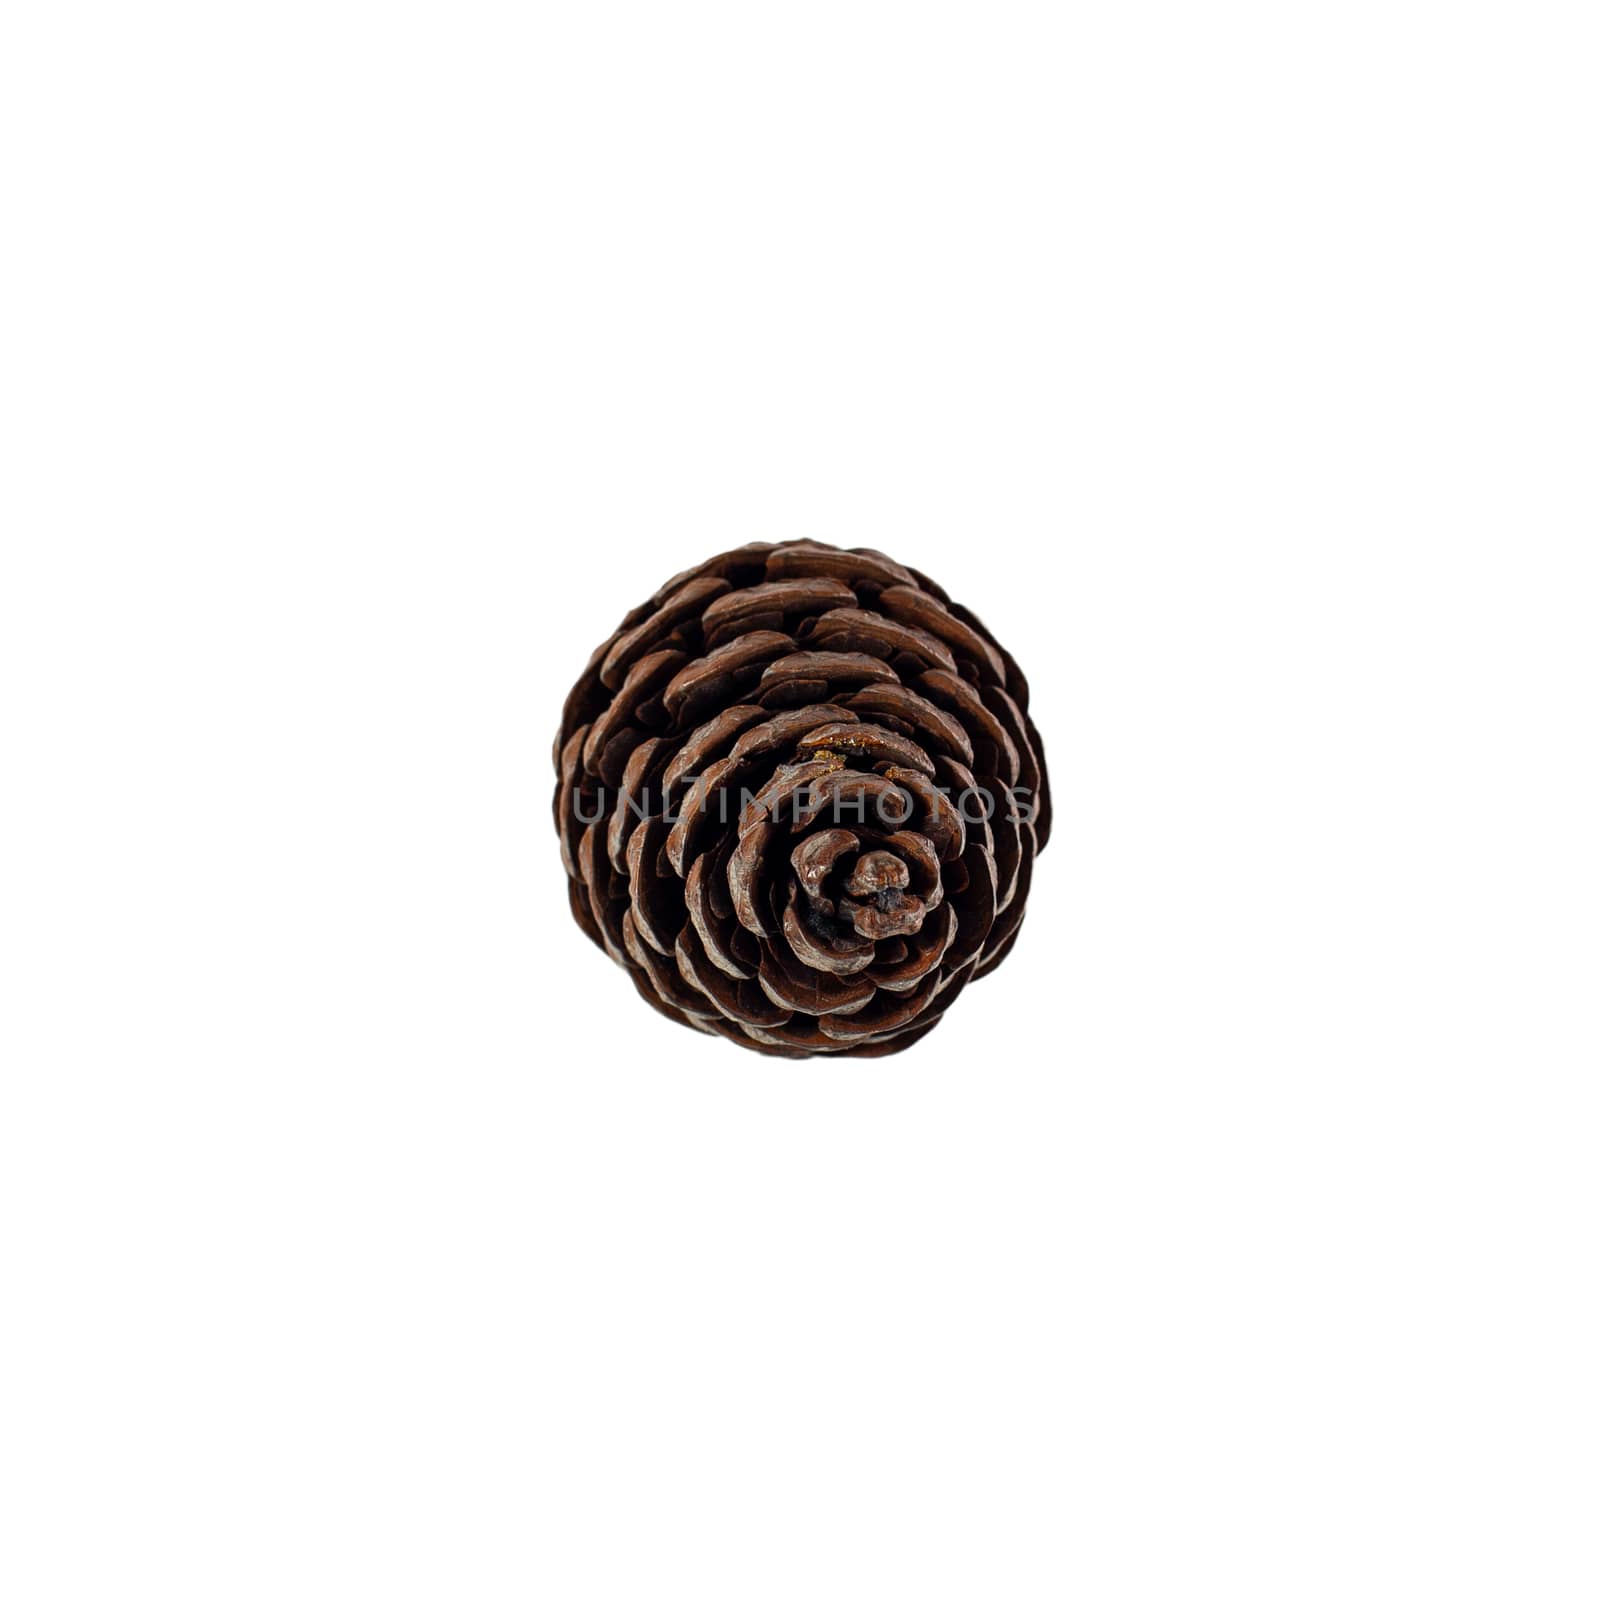 brown pine cone isolated on white background by 977_ReX_977